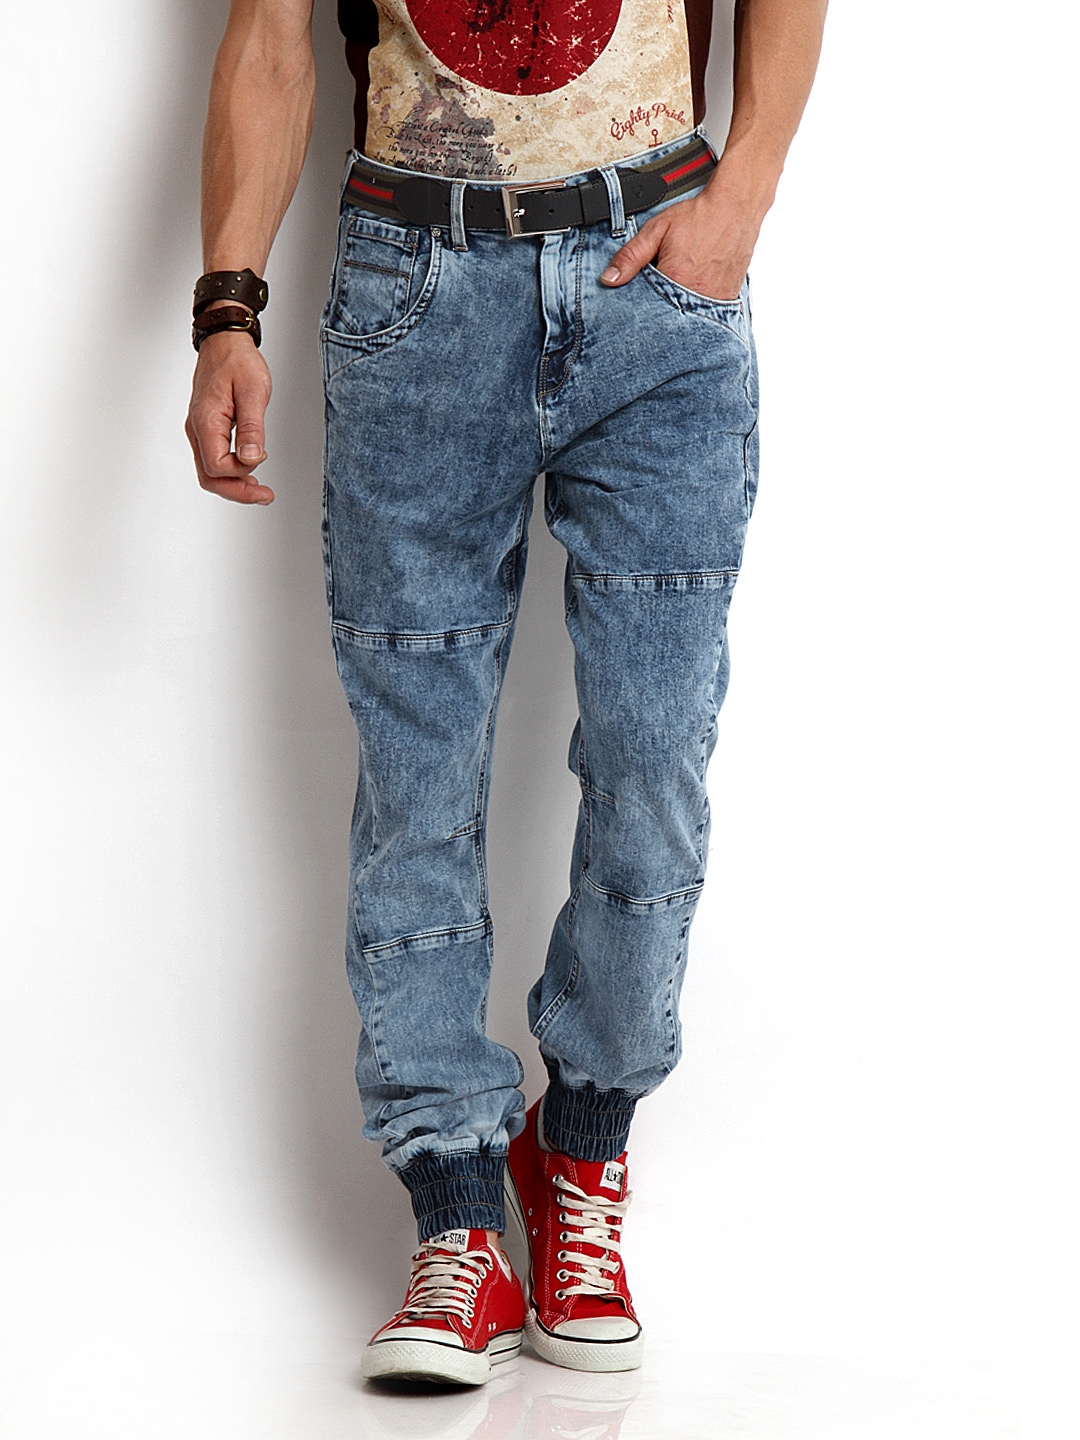 Order Jeans Online For Cheap - Jeans Am